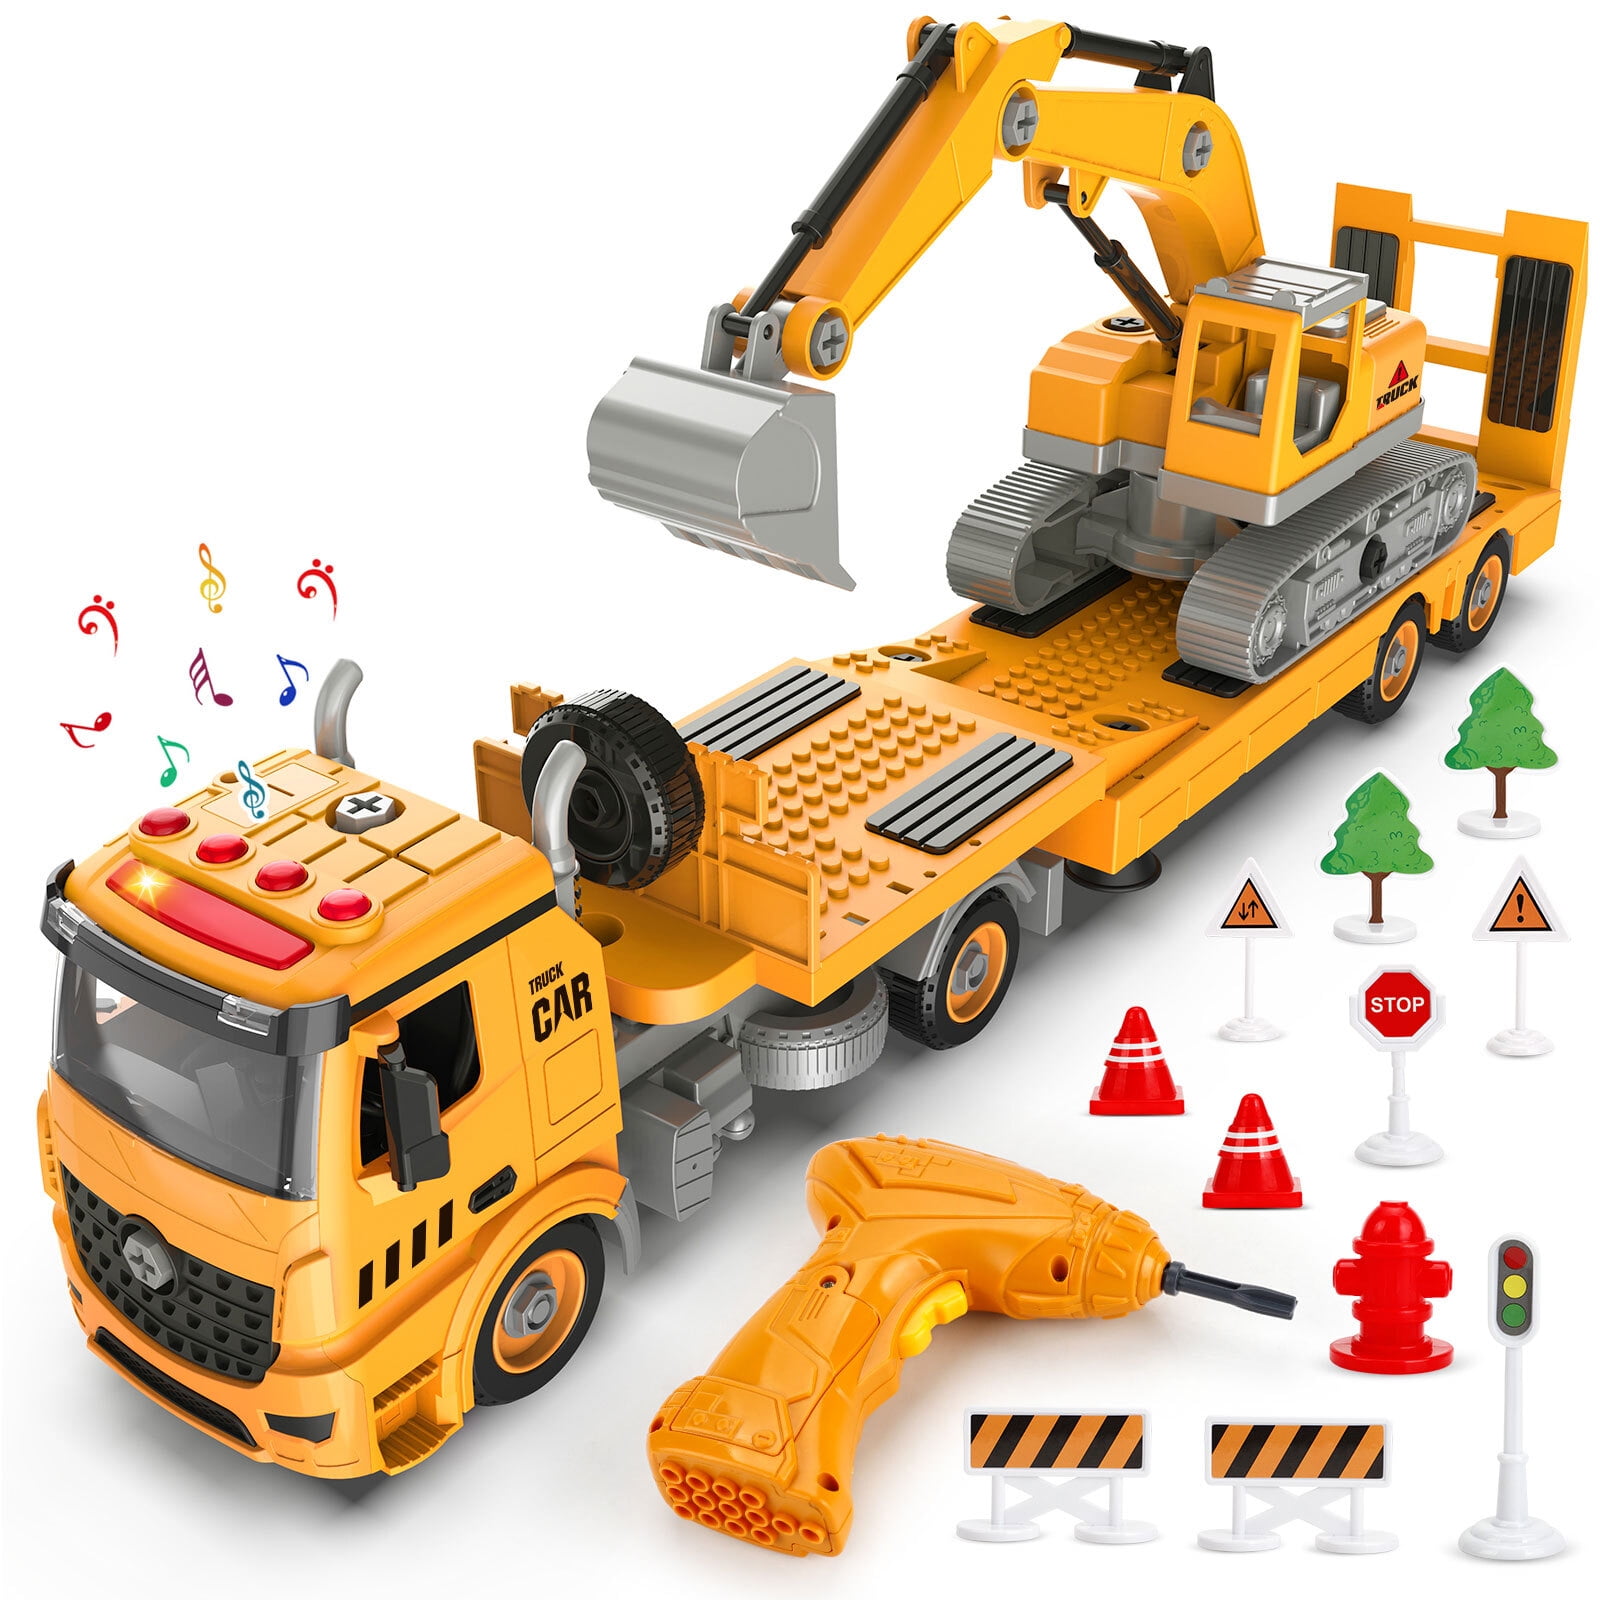 Hassch Construction Truck Toys for Ages 3+ Child, Big Excavator